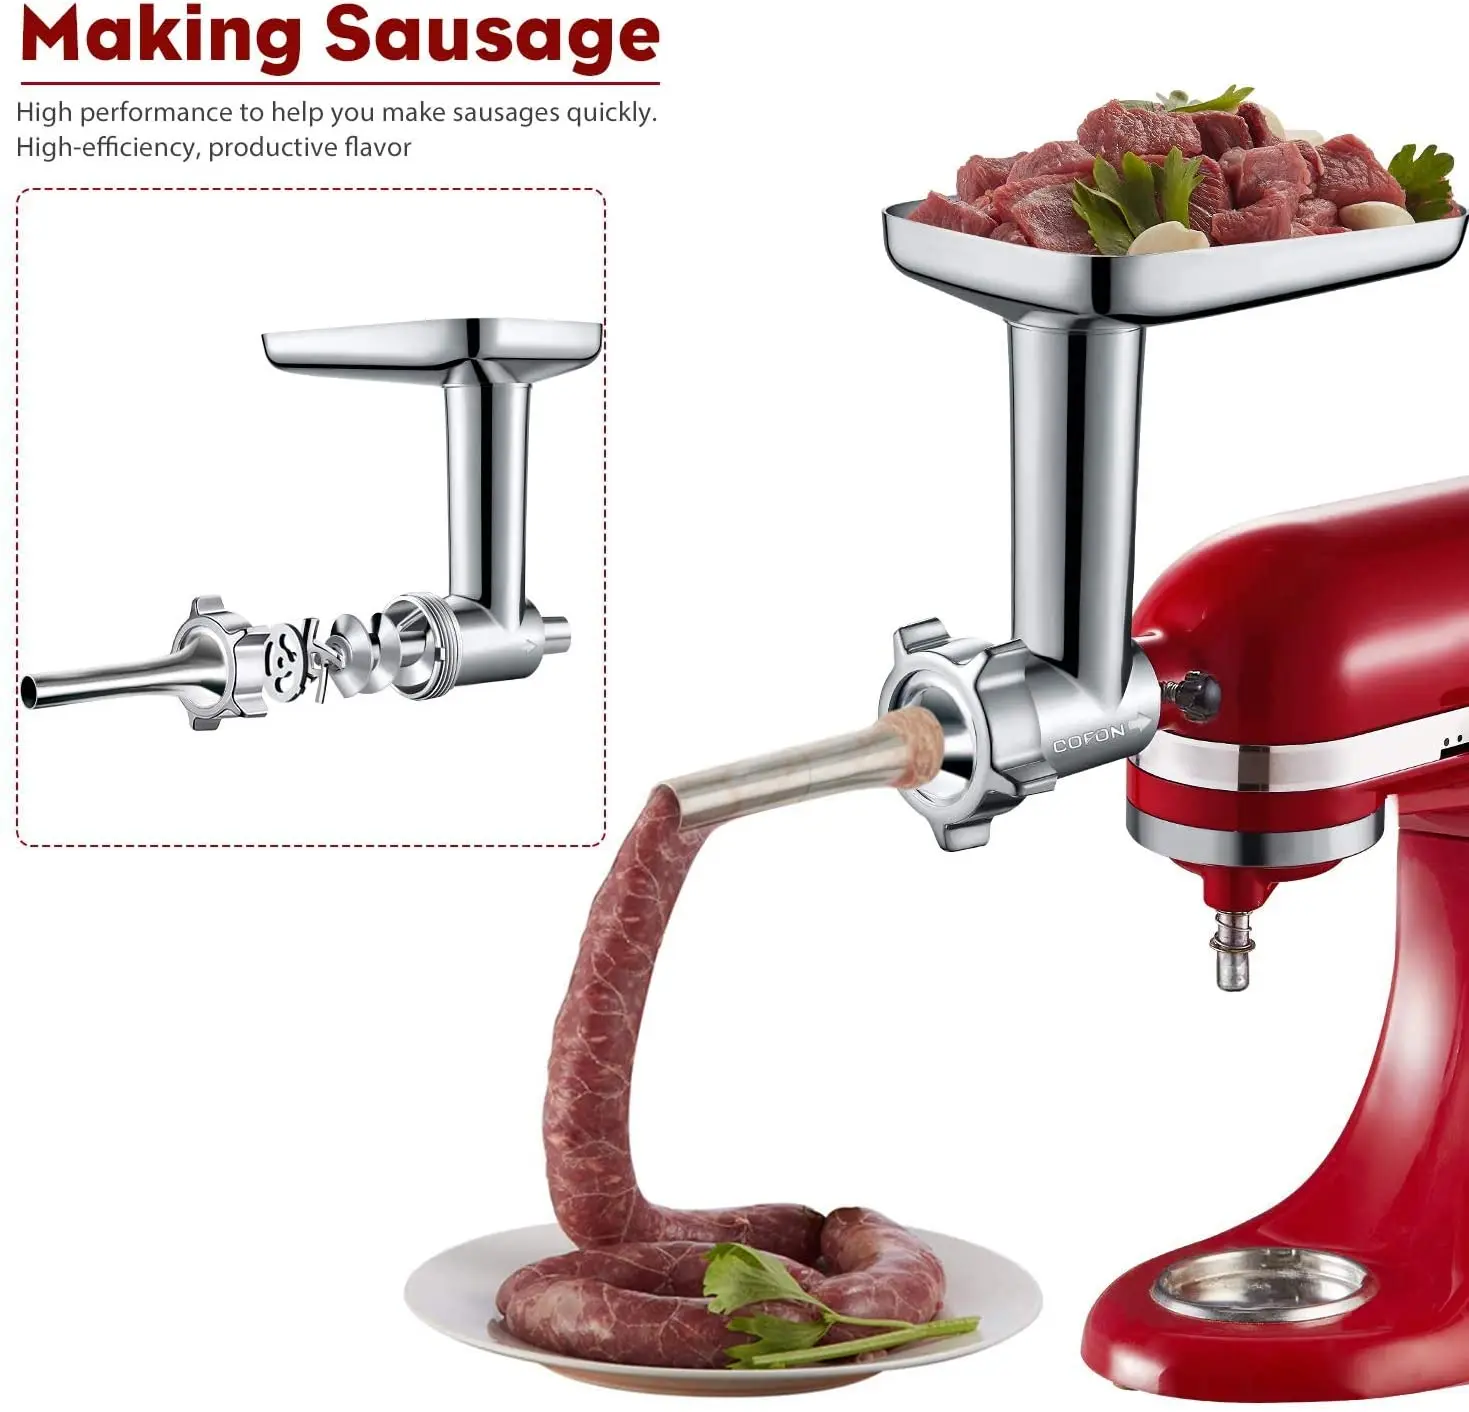 1xAl Stainless Steel Meat Grinder Sausage Stuffer Attachment Kit For Stand Mixer 